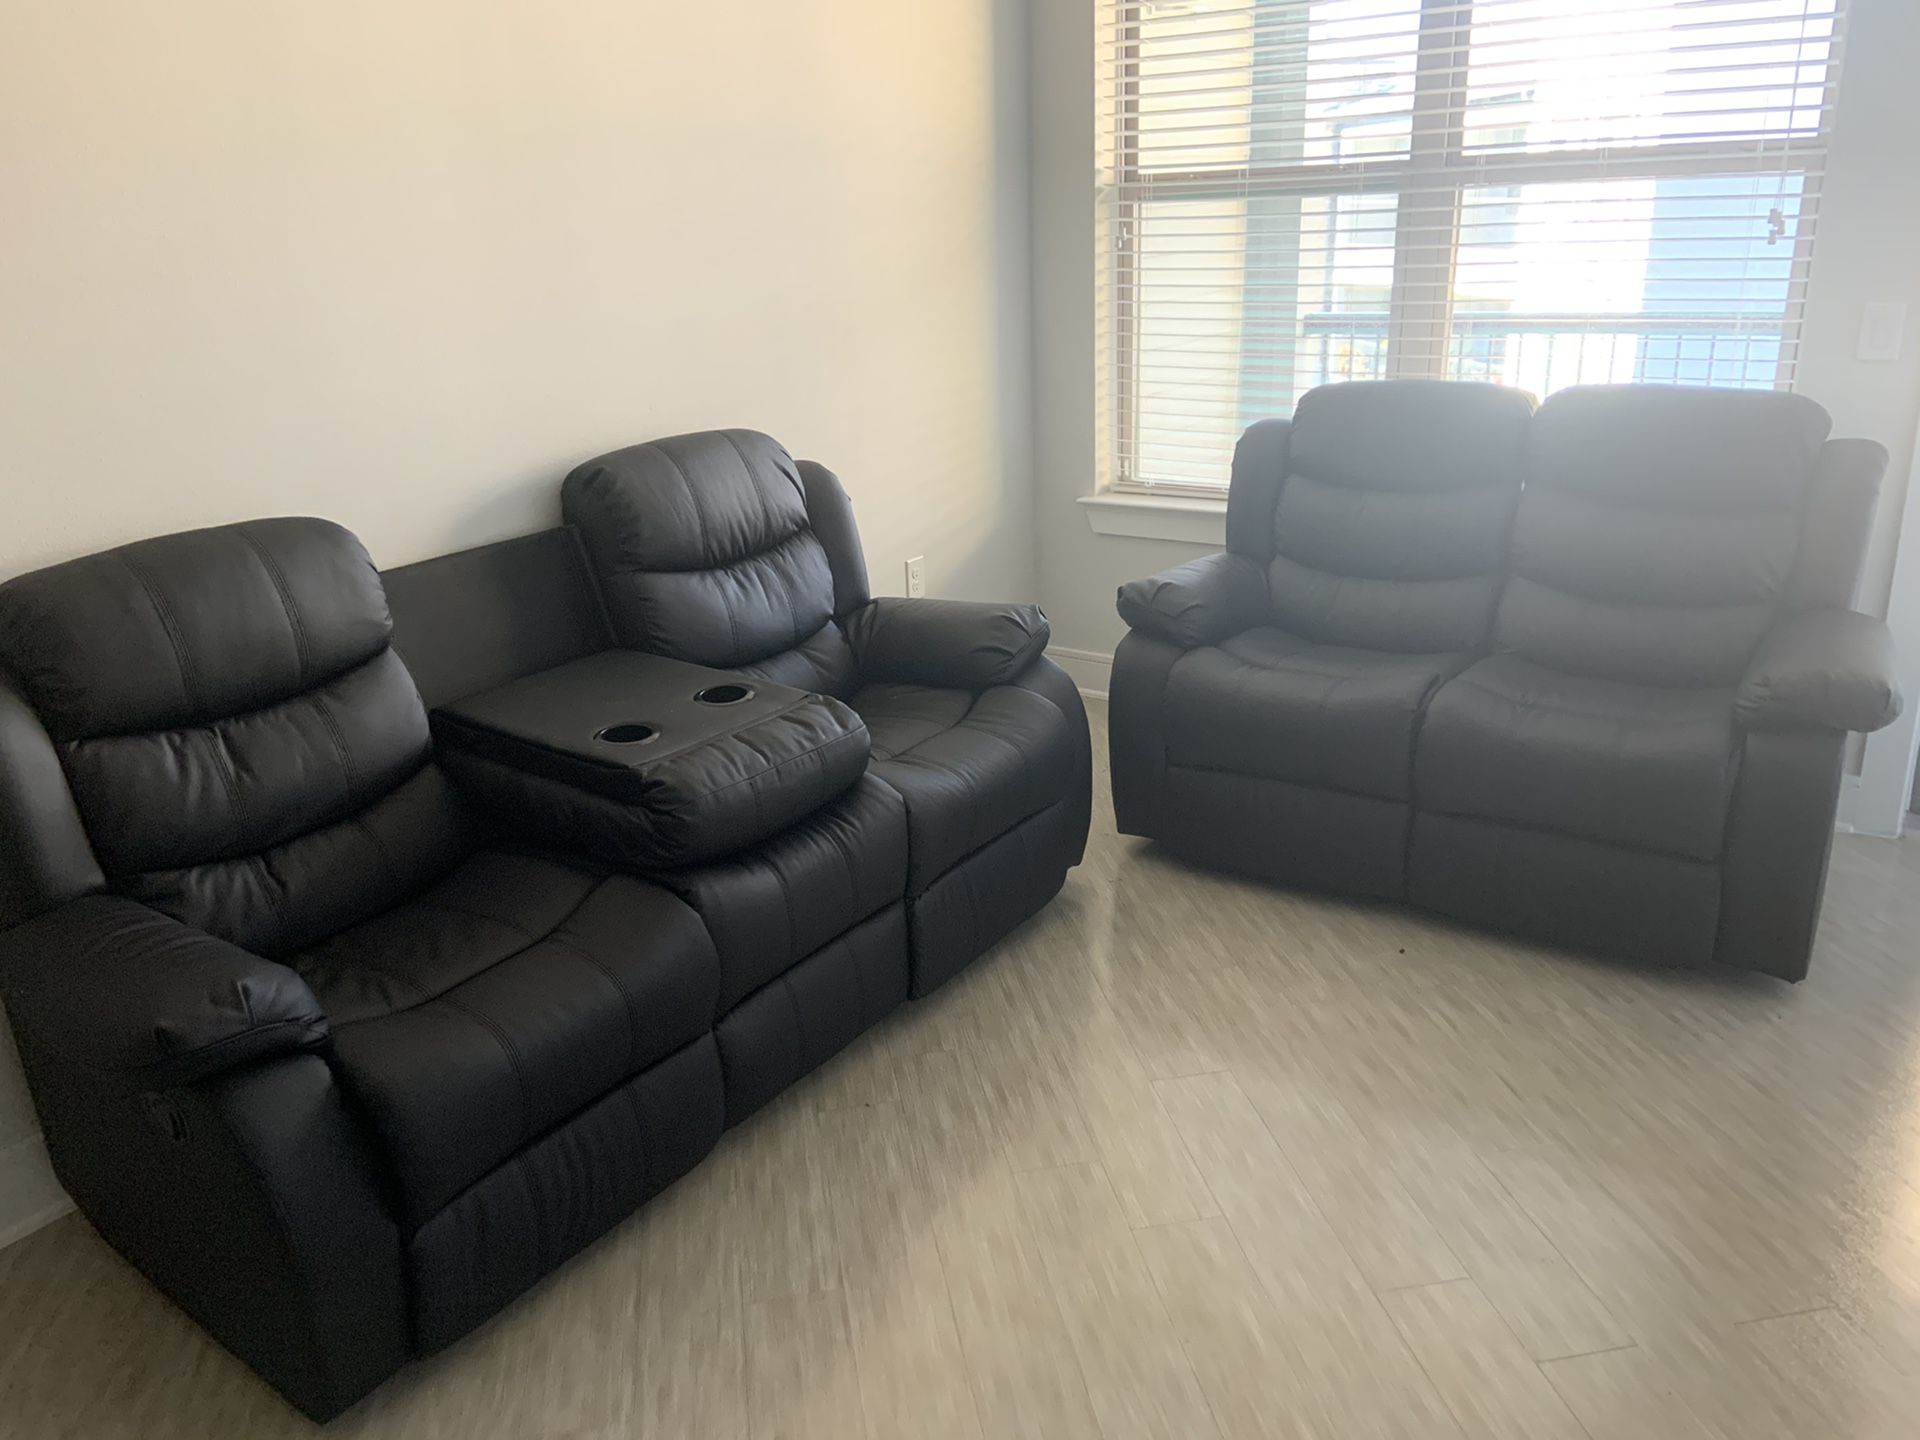 Movie style leather couches